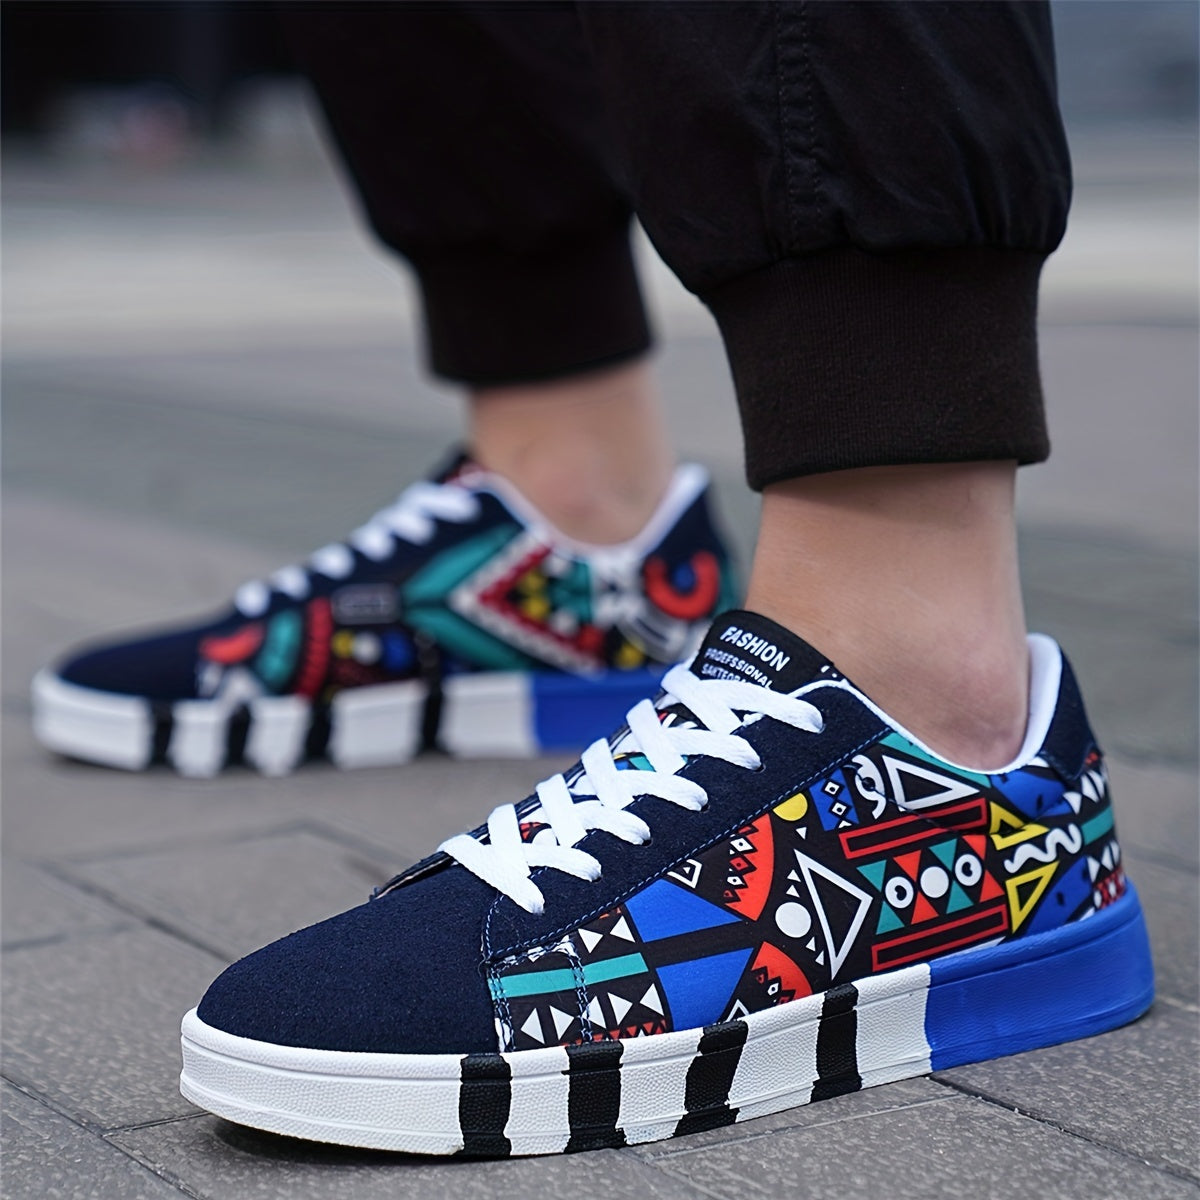 Trendy Skate Shoes - Comfy Non-Slip Casual Sneakers for Men's Outdoor Activities